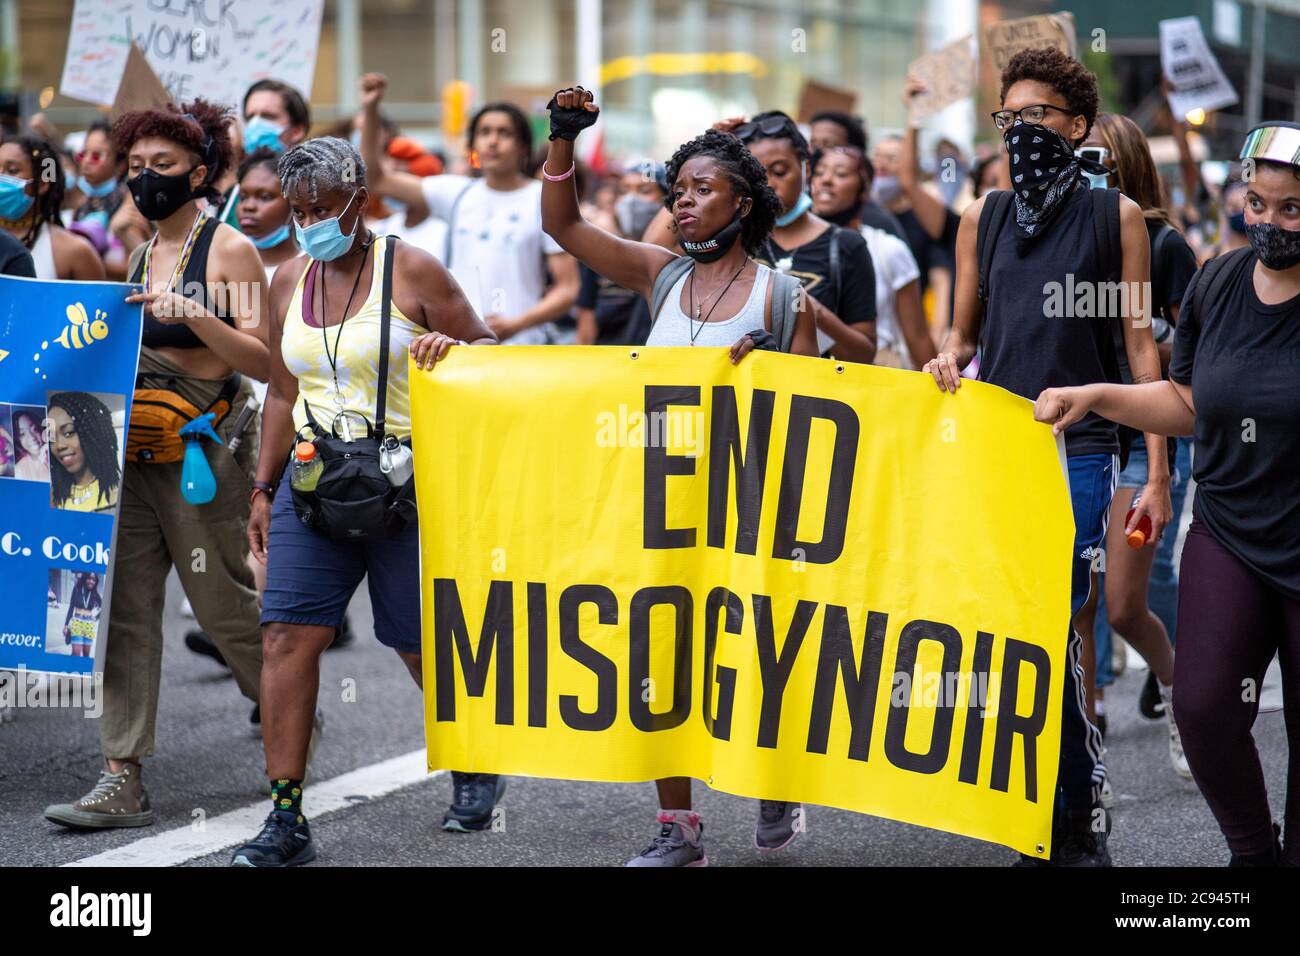 Misogynoir hires stock photography and images Alamy